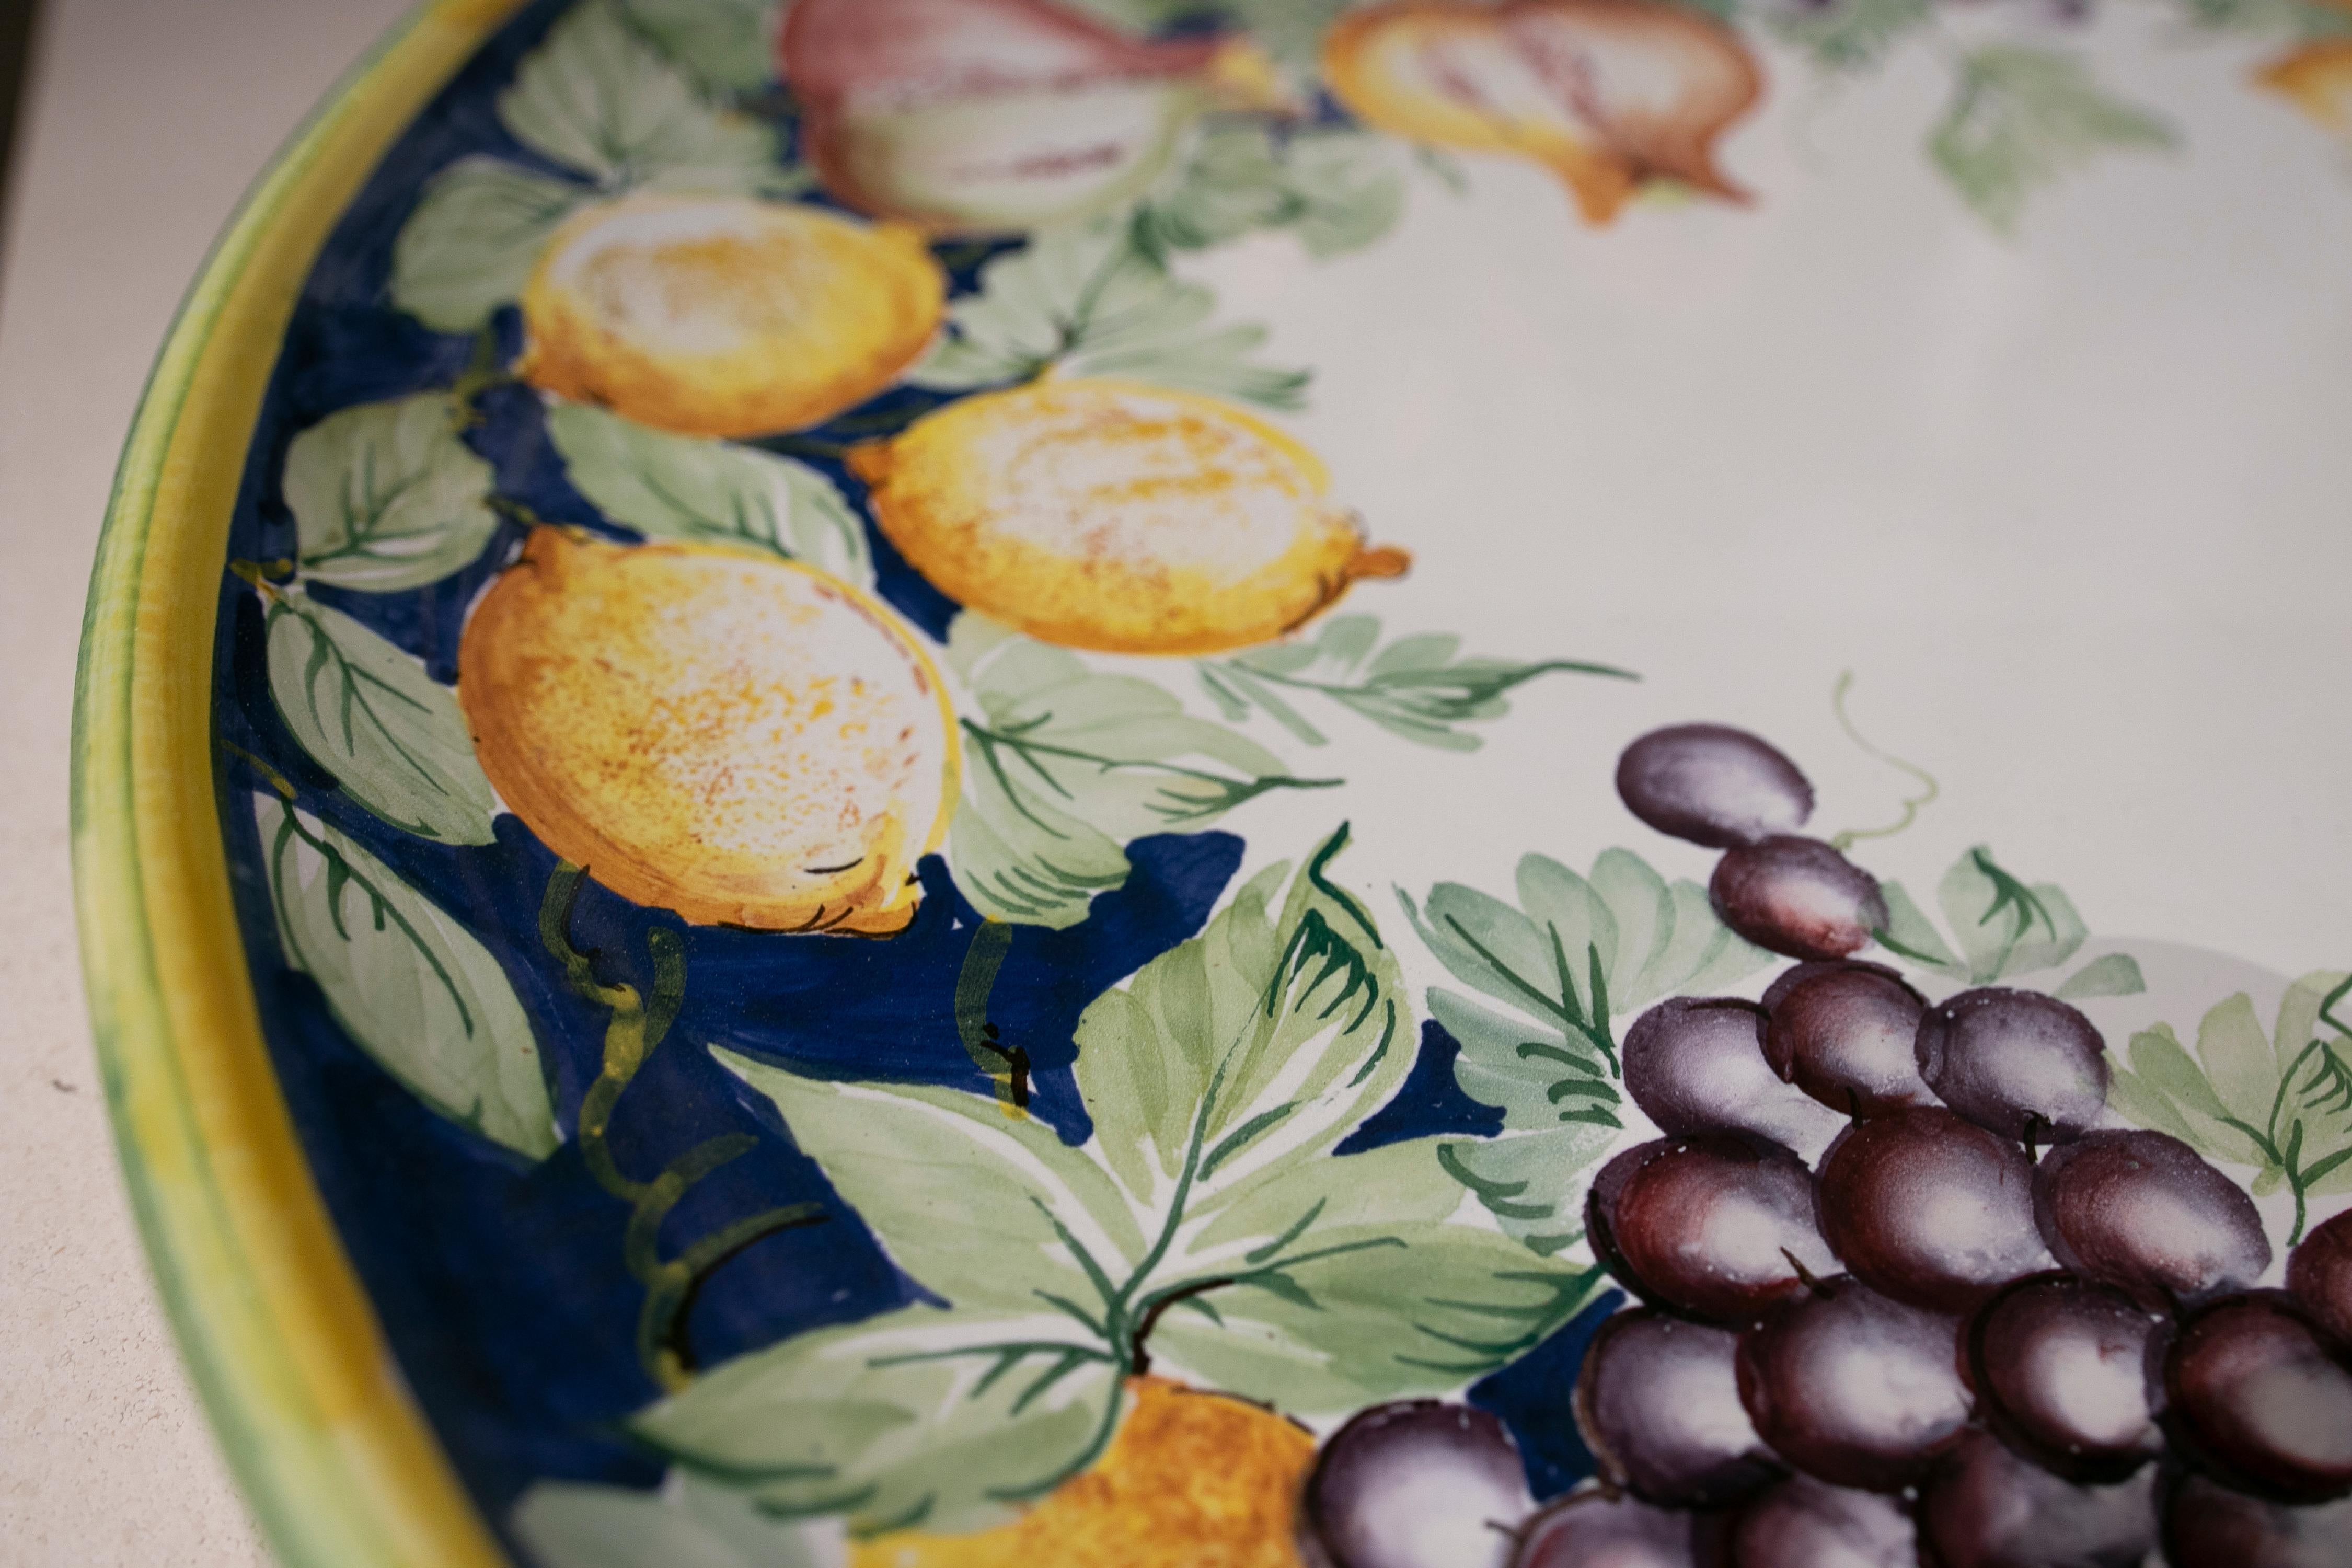 Italian Hand Painted Glazed Ceramic Dish with Fruits and Leaves 7